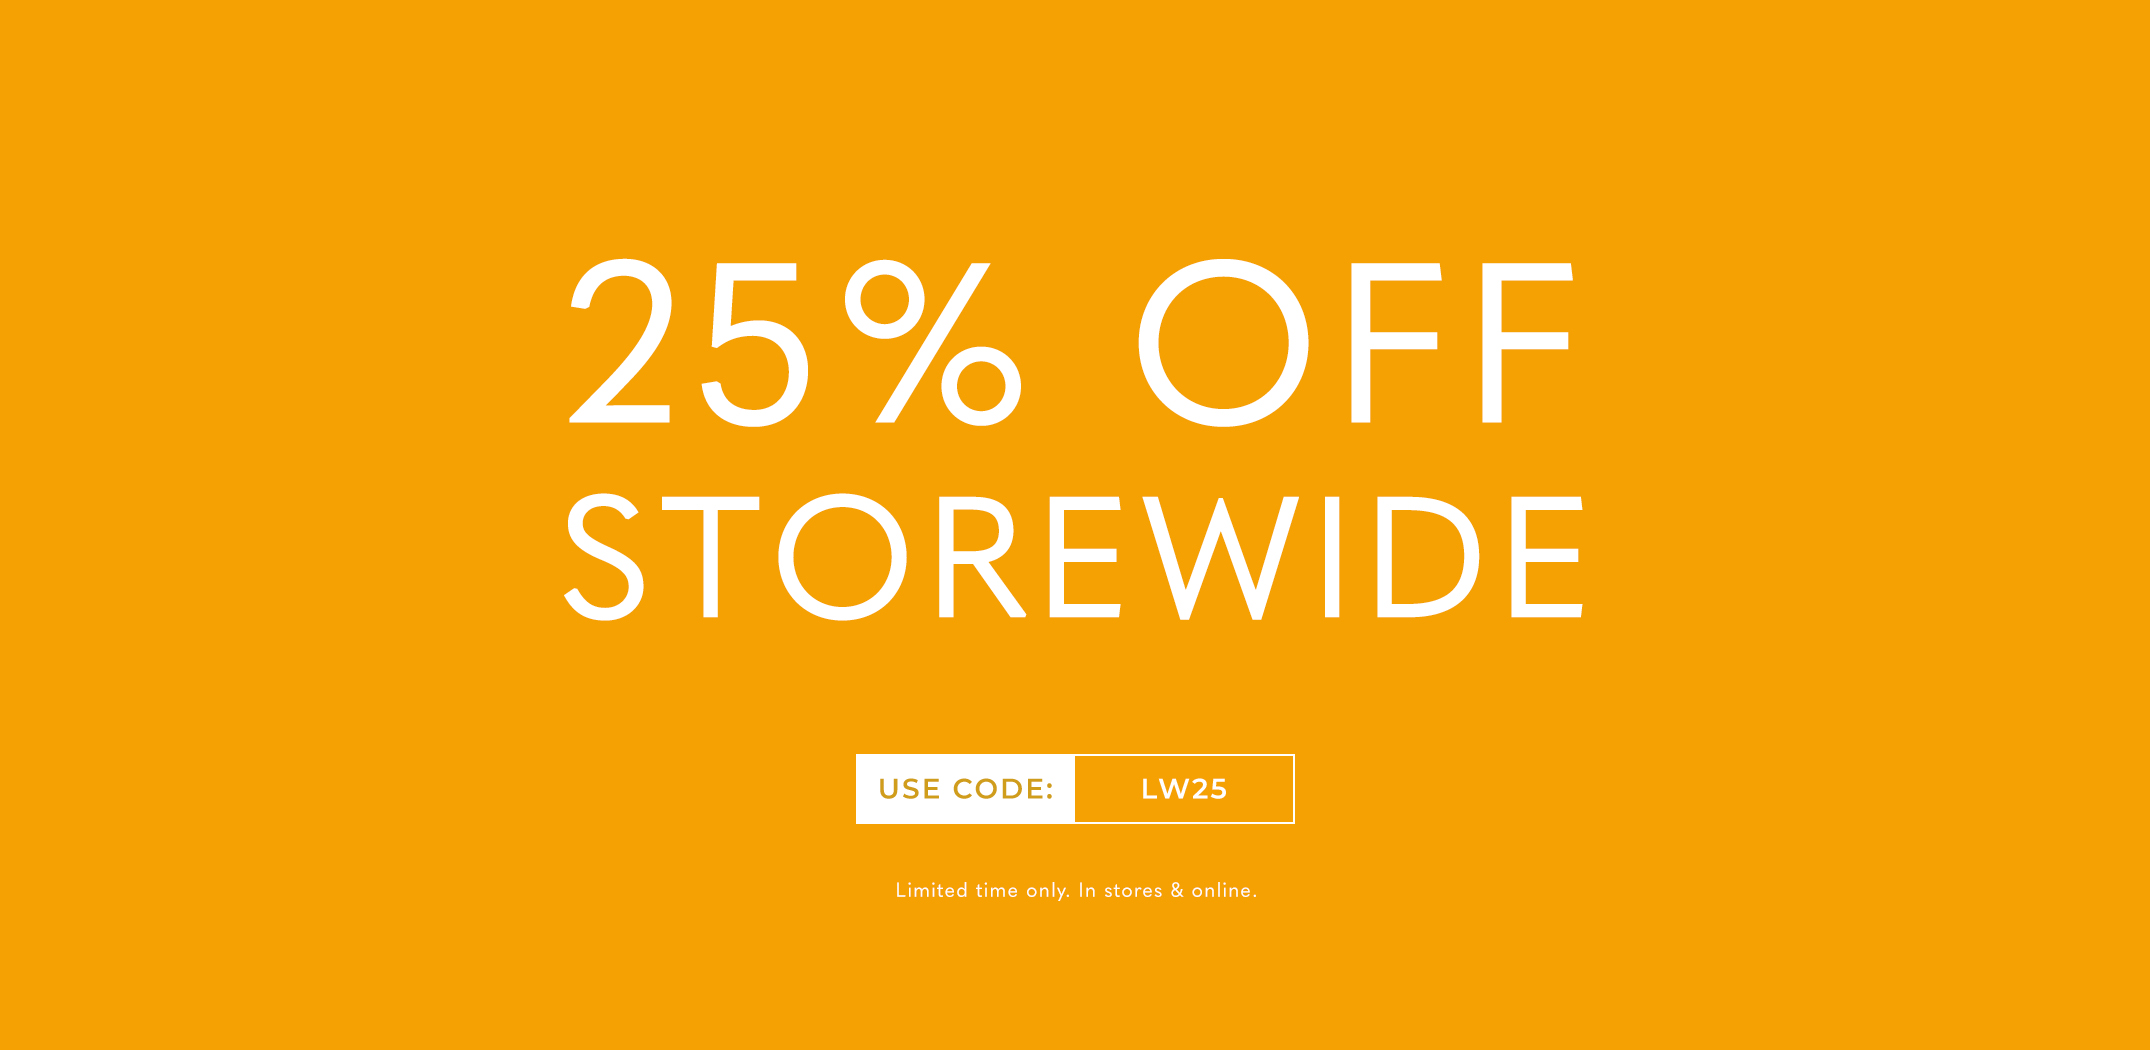 Forcast - Extra 25% OFF storewide with promo code